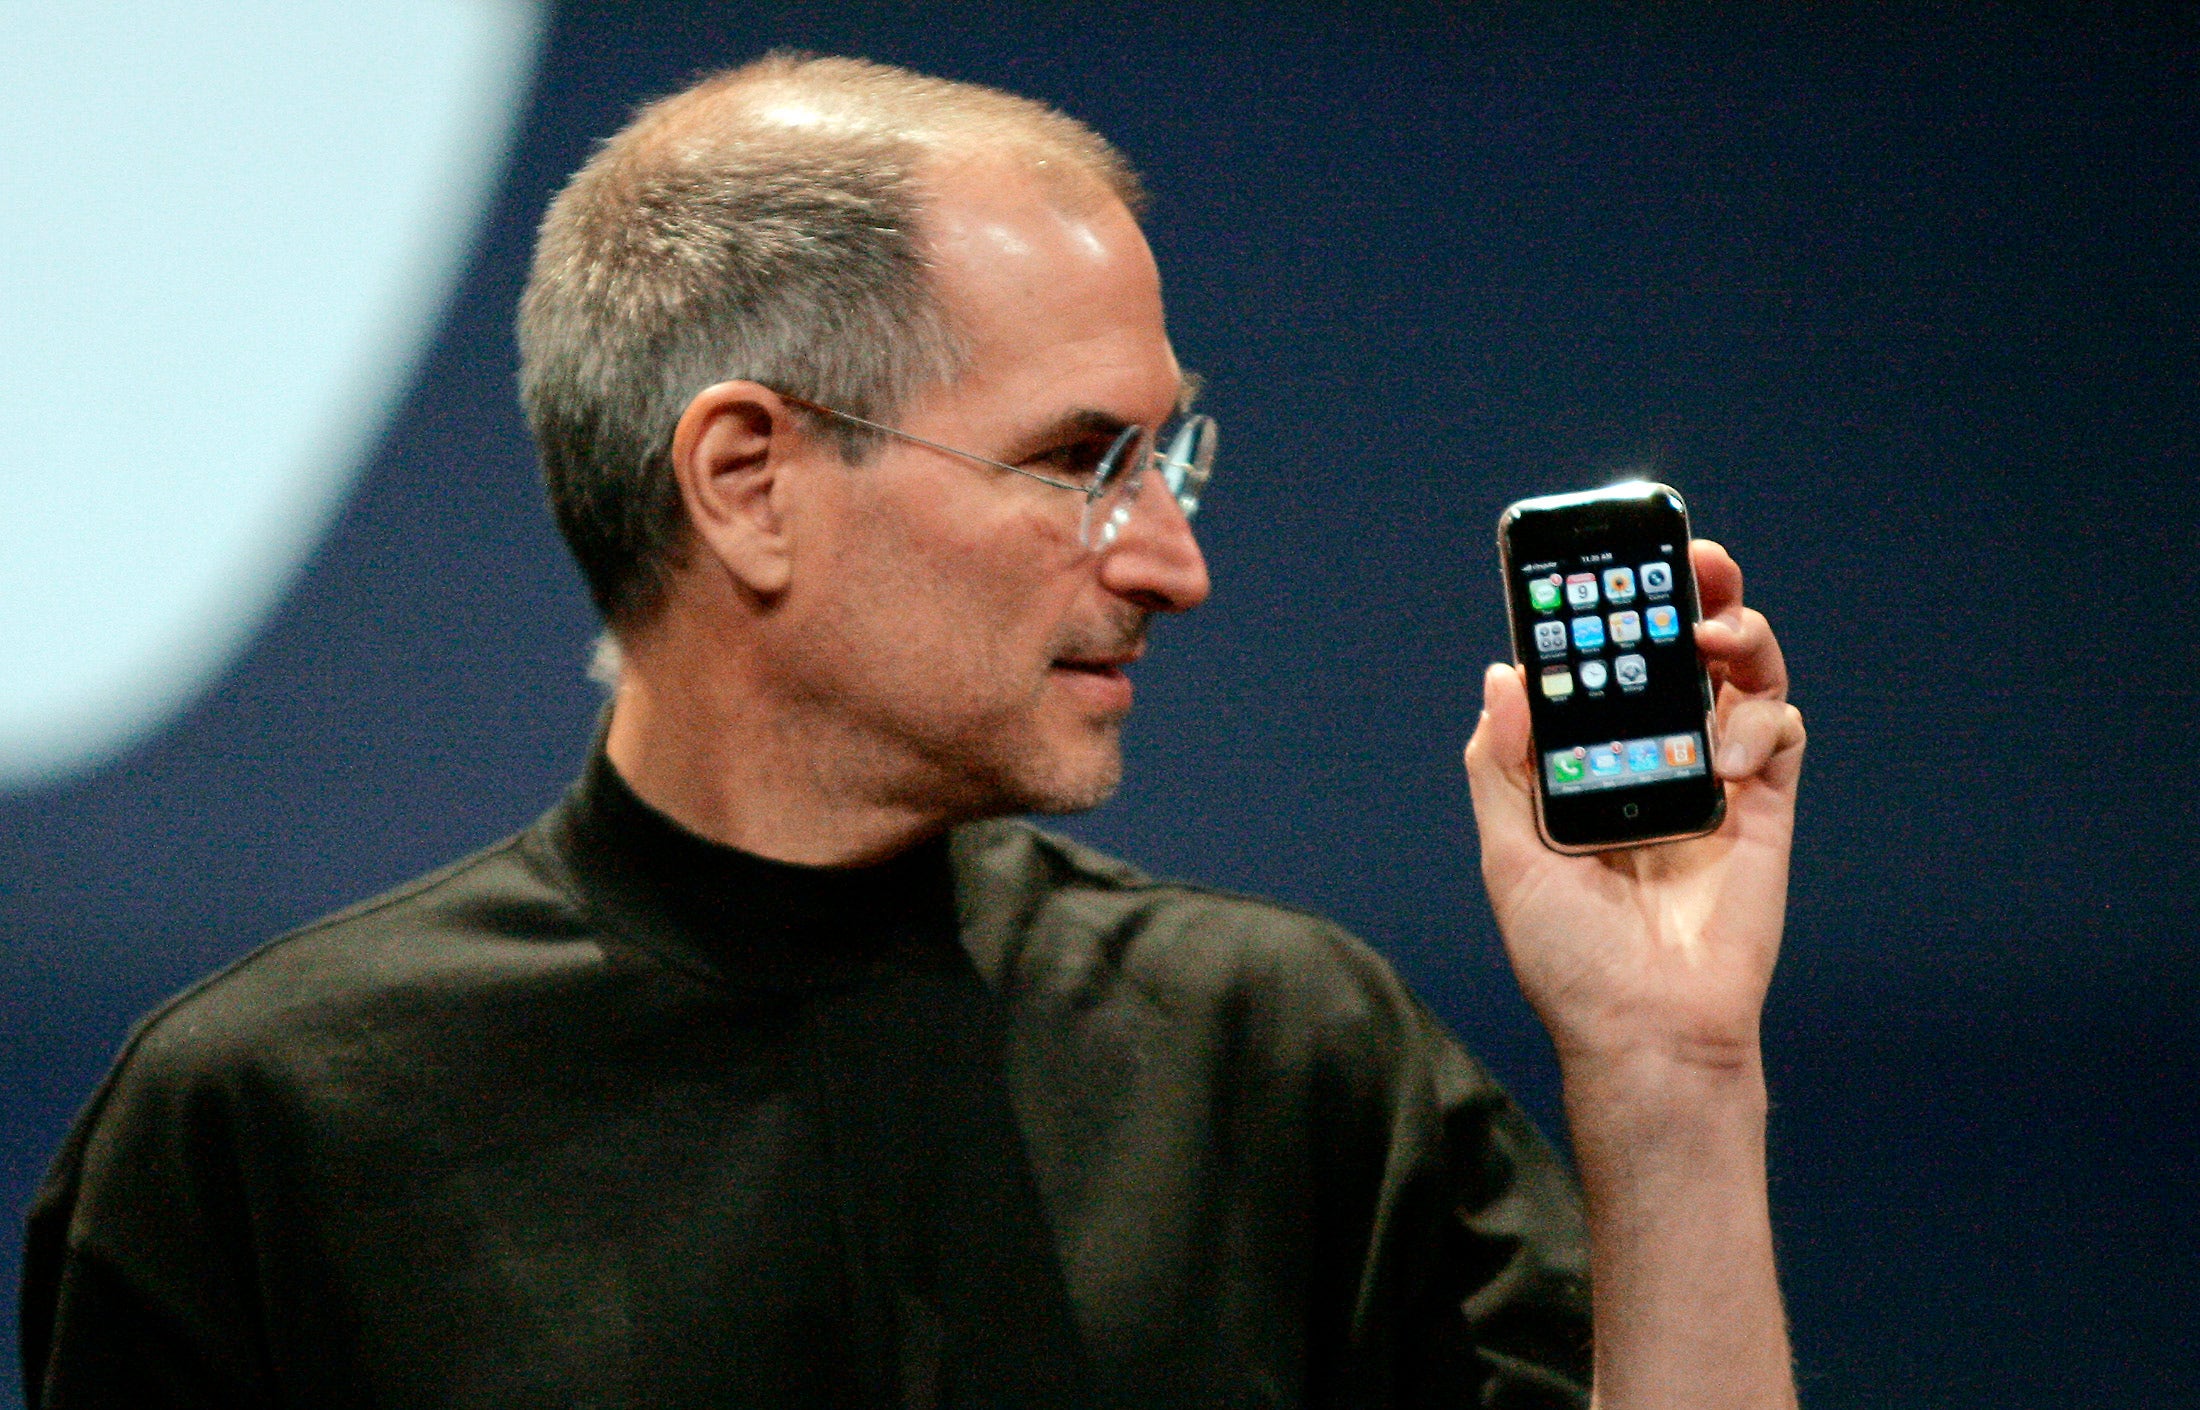 On this day in history, Jan. 9, 2007, Steve Jobs introduces Apple iPhone at Macworld in San Francisco